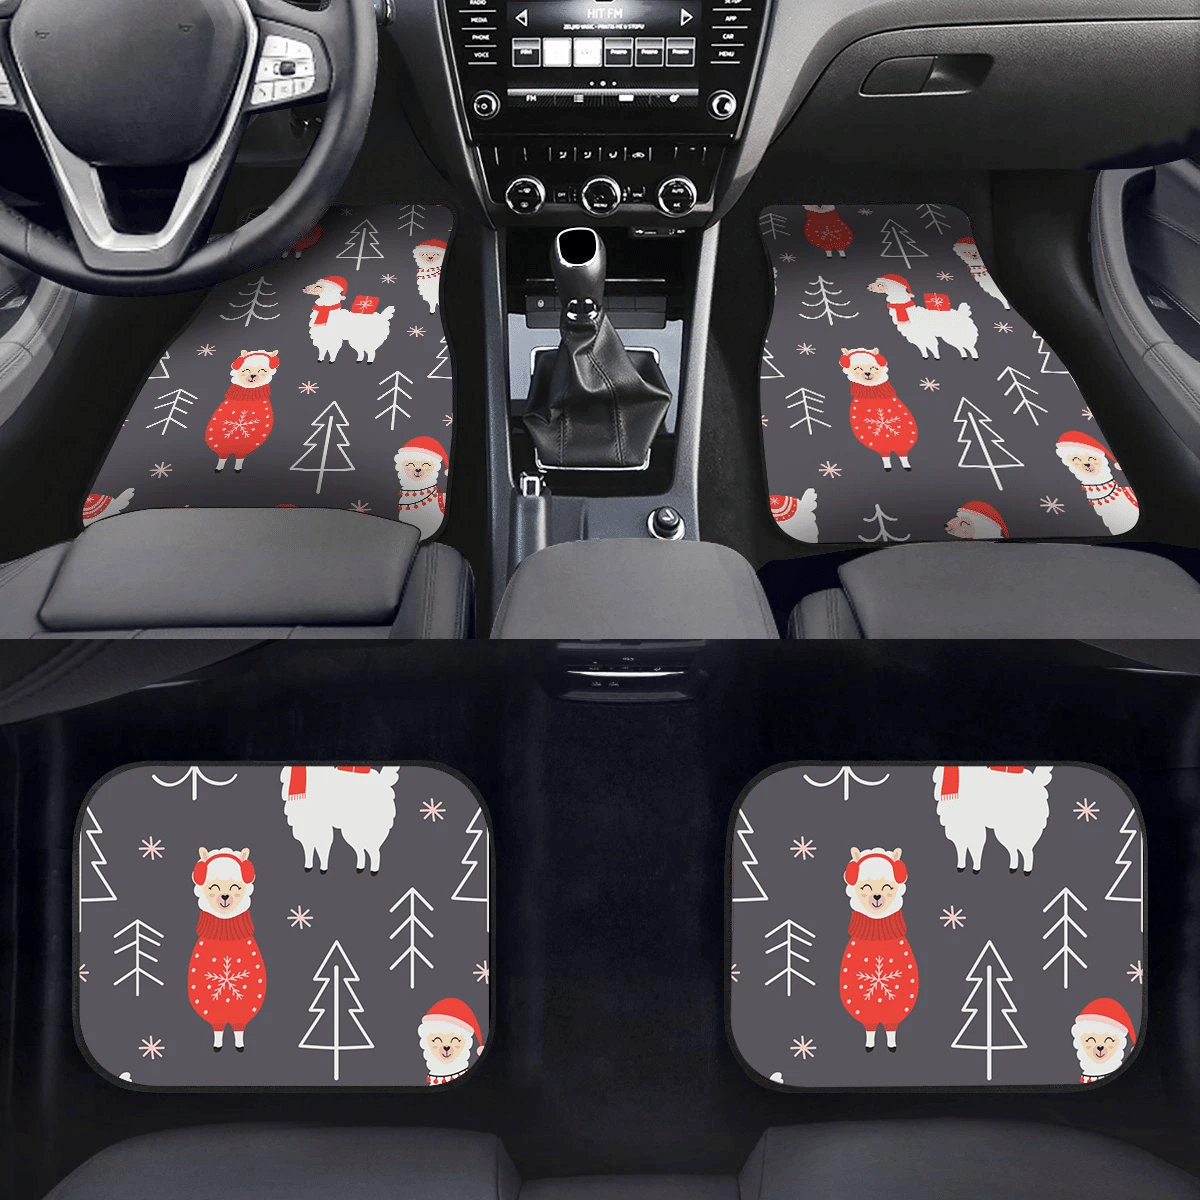 Lovely Llamas In Christmas Clothes Outline Pine Trees Car Mats Car Floor Mats